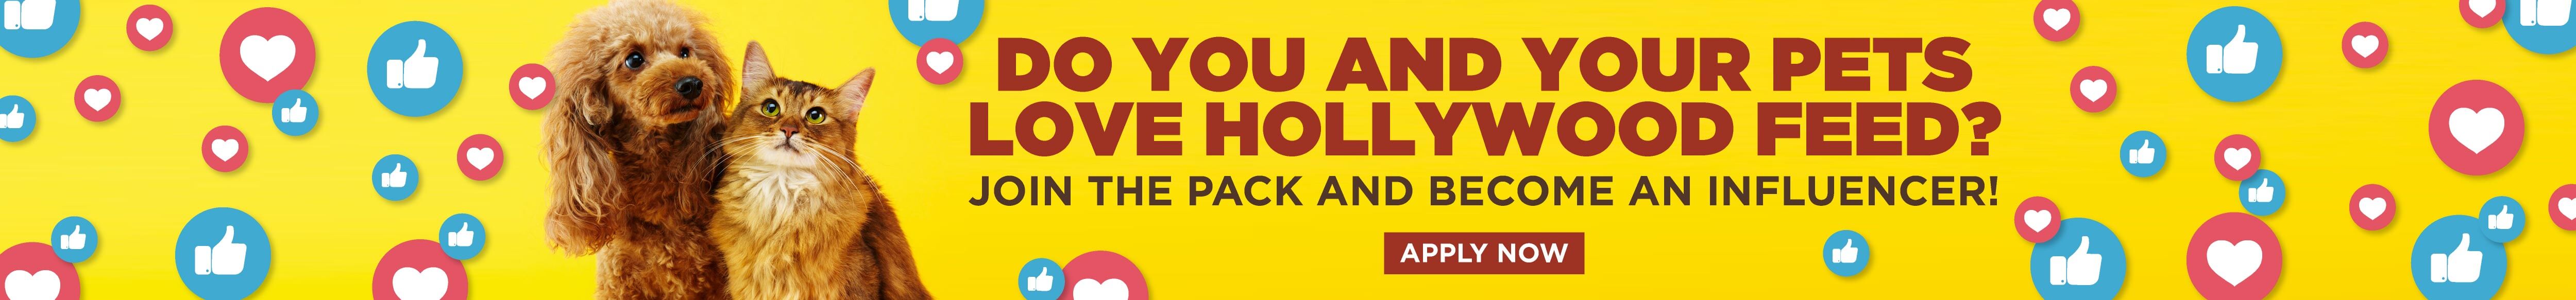 Do You and your pets love Hollywood Feed? Apply to be an influencer. Click to visit the apply now page